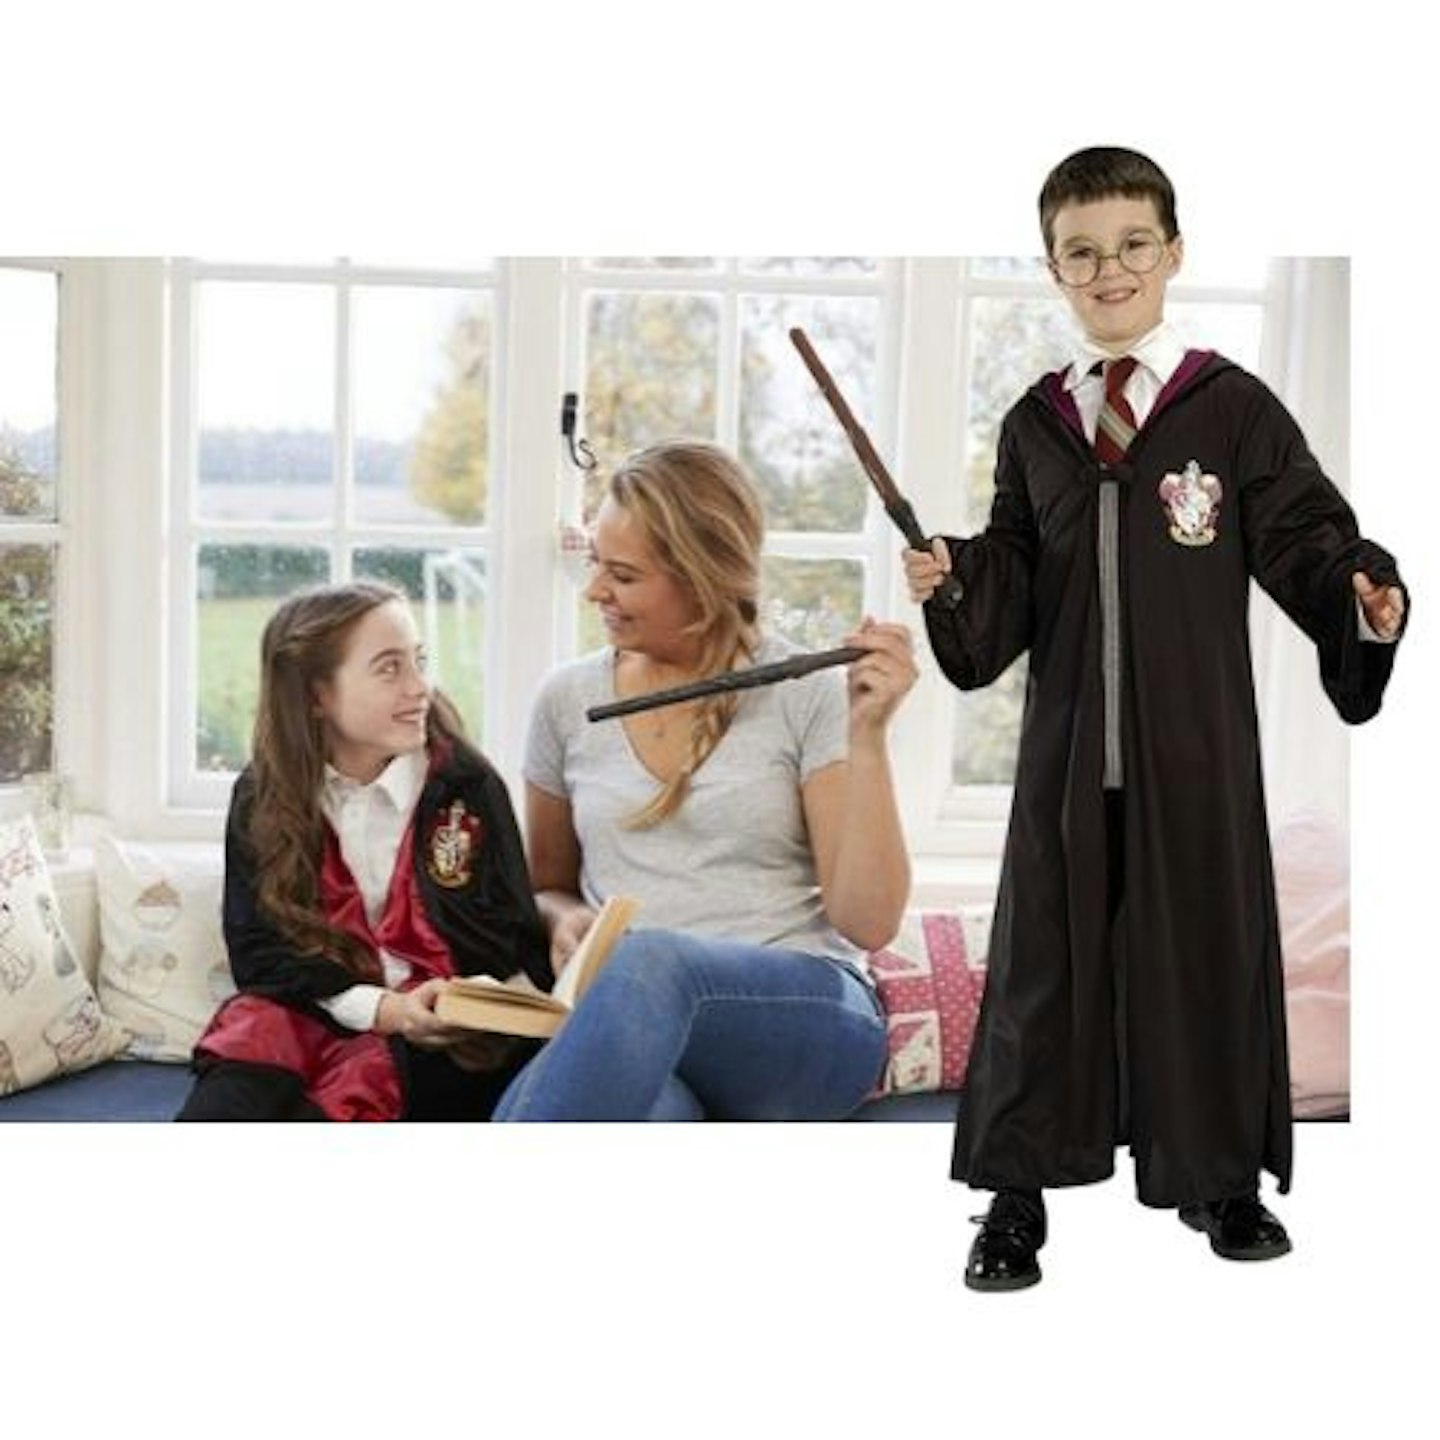 Harry Potter Pack Gryffindor Robe, Wand and Glasses